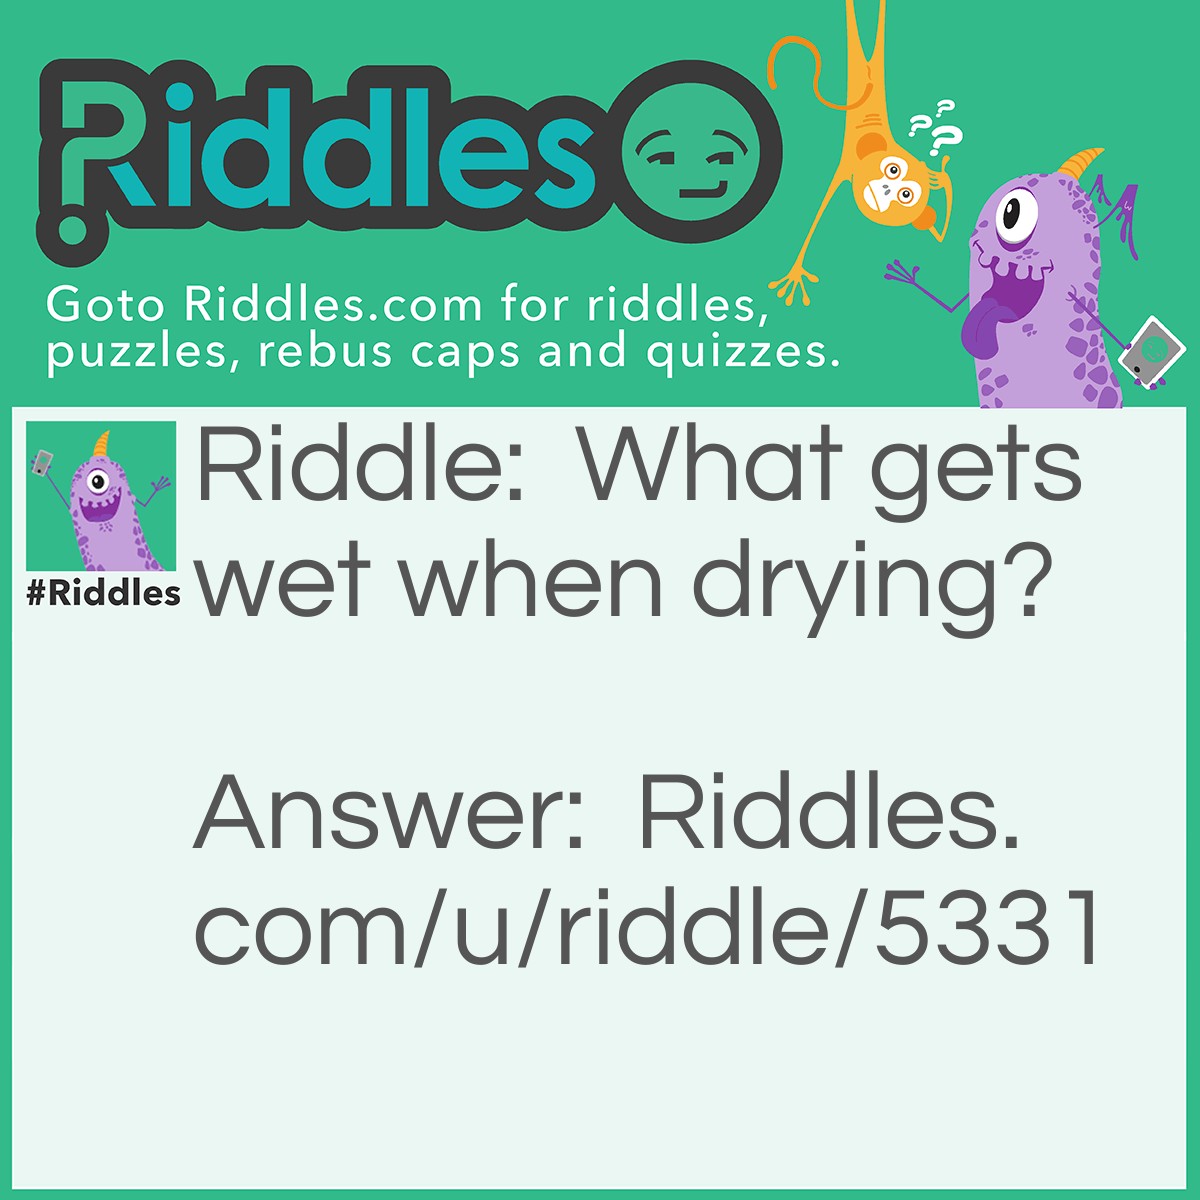 Riddle: What gets wet when drying? Answer: Towel.